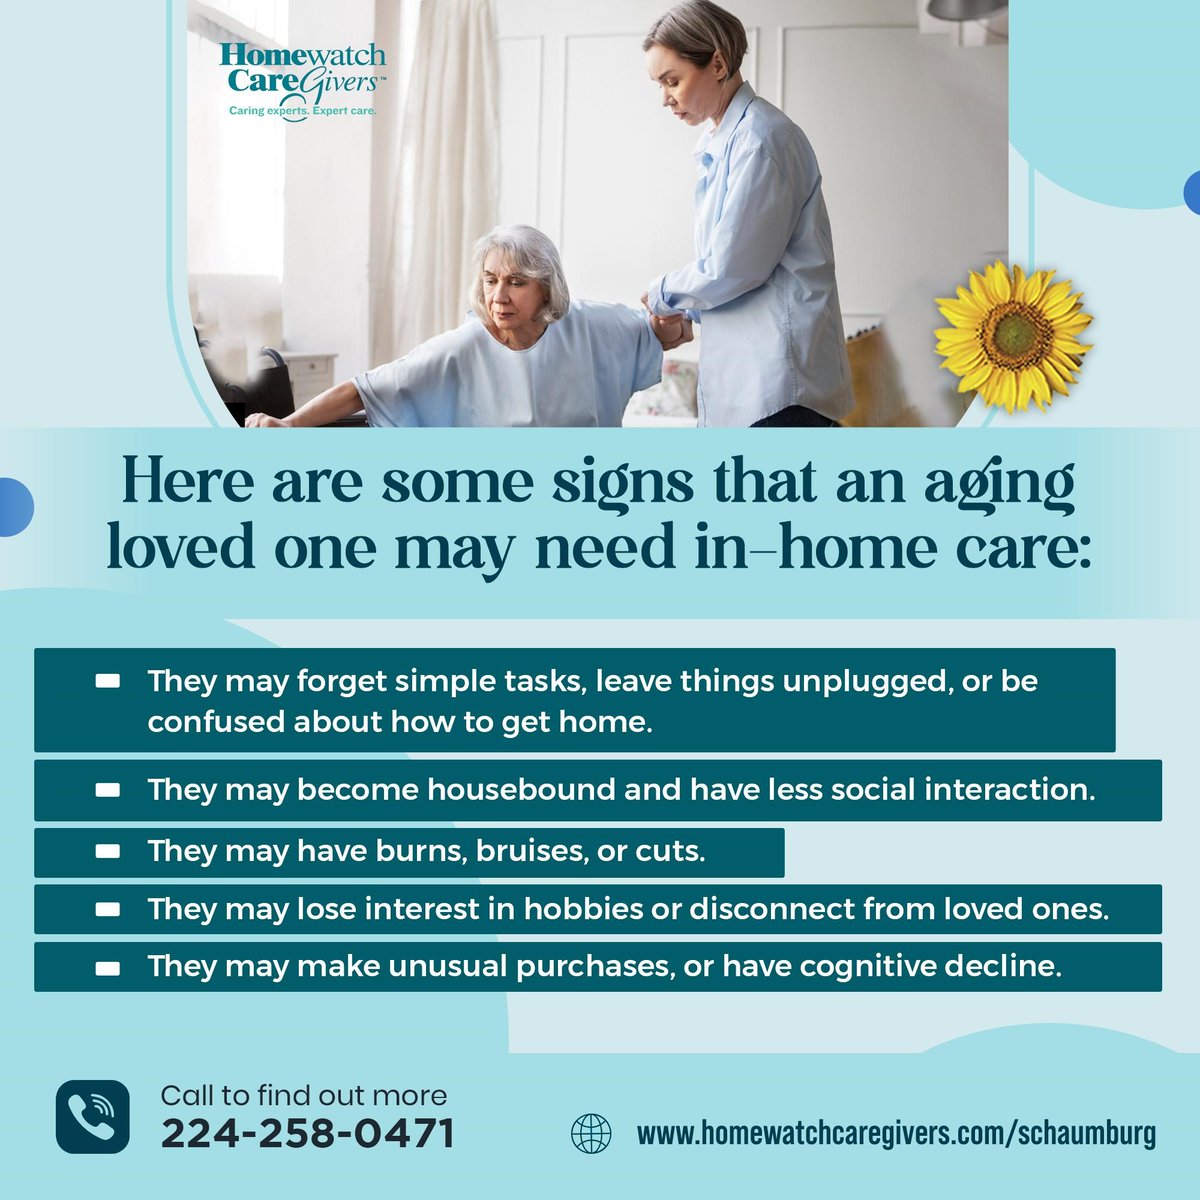 Is your aging loved one showing any of these signs? 
Leaving the stove on, forgetting appointments, or becoming withdrawn could be signs they need a helping hand. 
#homecare #HomeWatch #caregivers #trainedprofessional #elderscare #Caregiversschaumburg